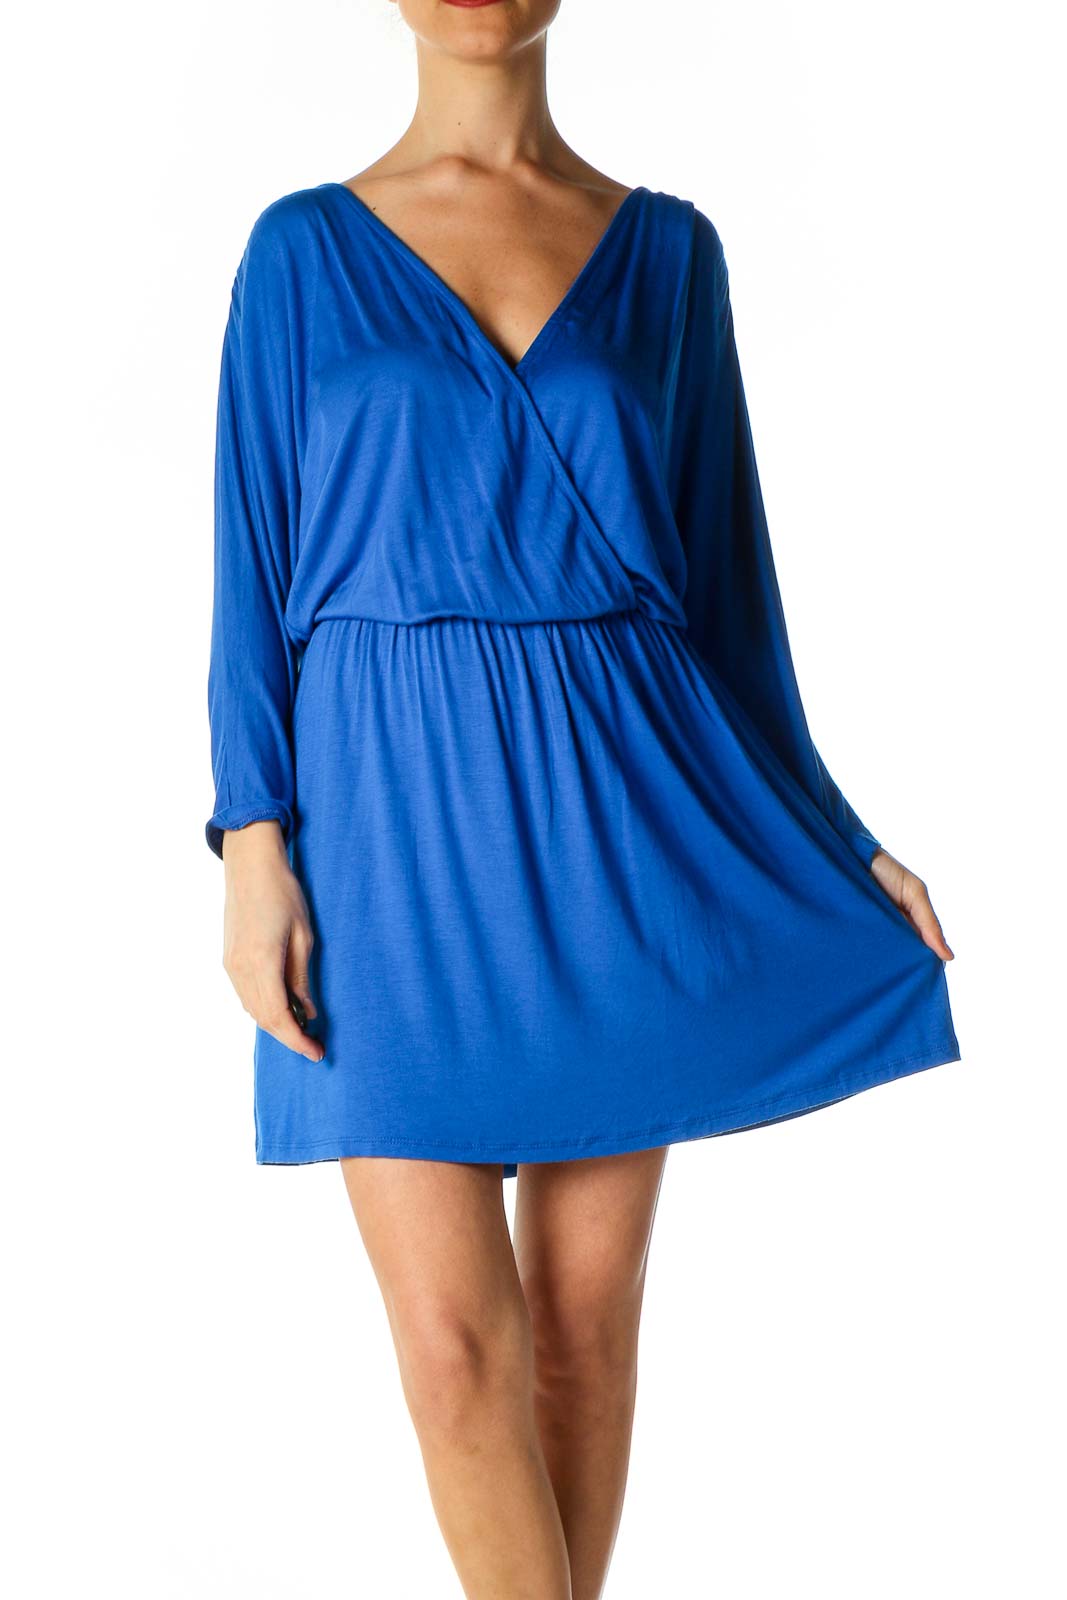 Blue Solid Bohemian Fit & Flare Dress Front